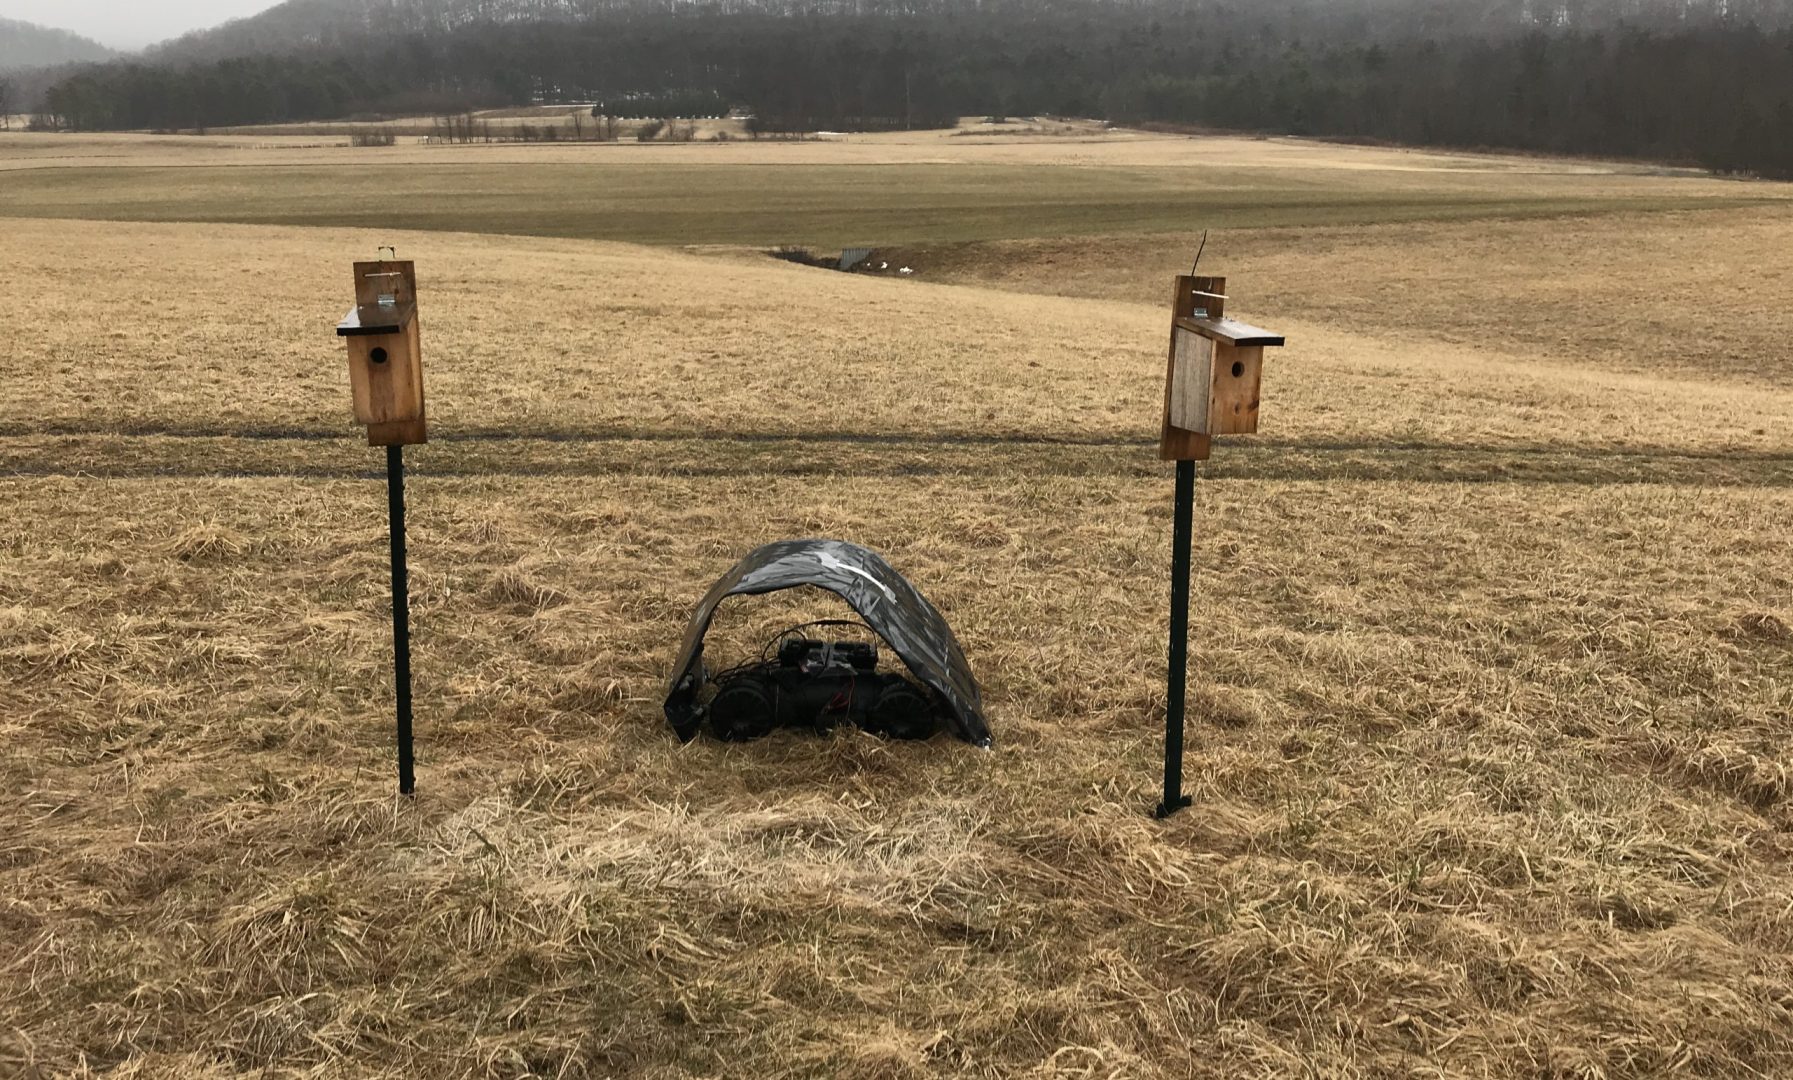 Penn State researchers played shale gas compressor noise next to half of the nest boxes in a study designed to measure the impact of compressor noise on songbirds' reproductive success.